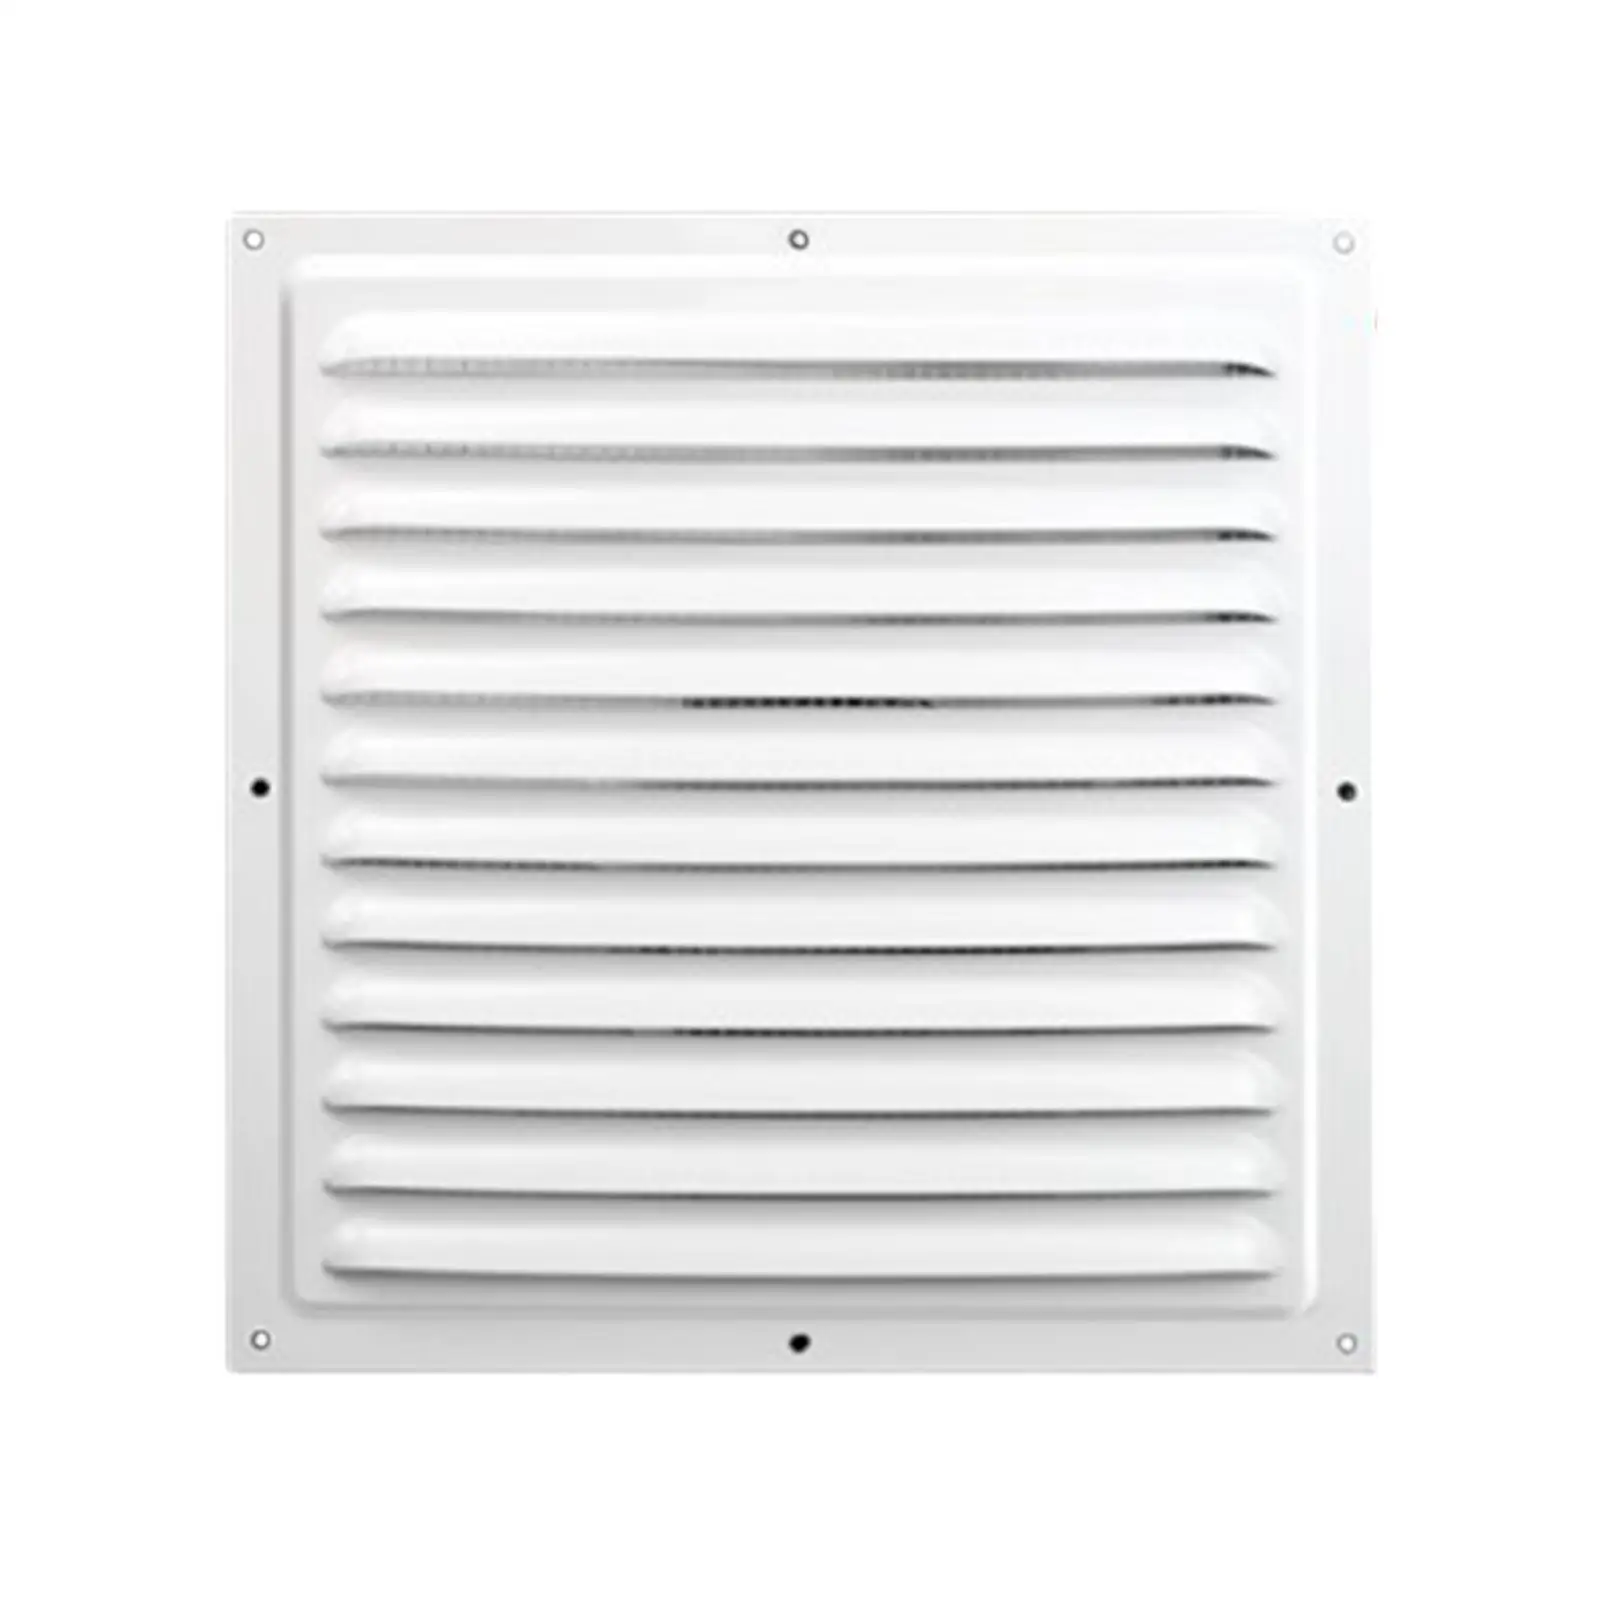 Air Vent Cover White Square Air Vent Louver Air Return Grill Cover Ventilation Cover for Garages Home Office Rvs Ceiling